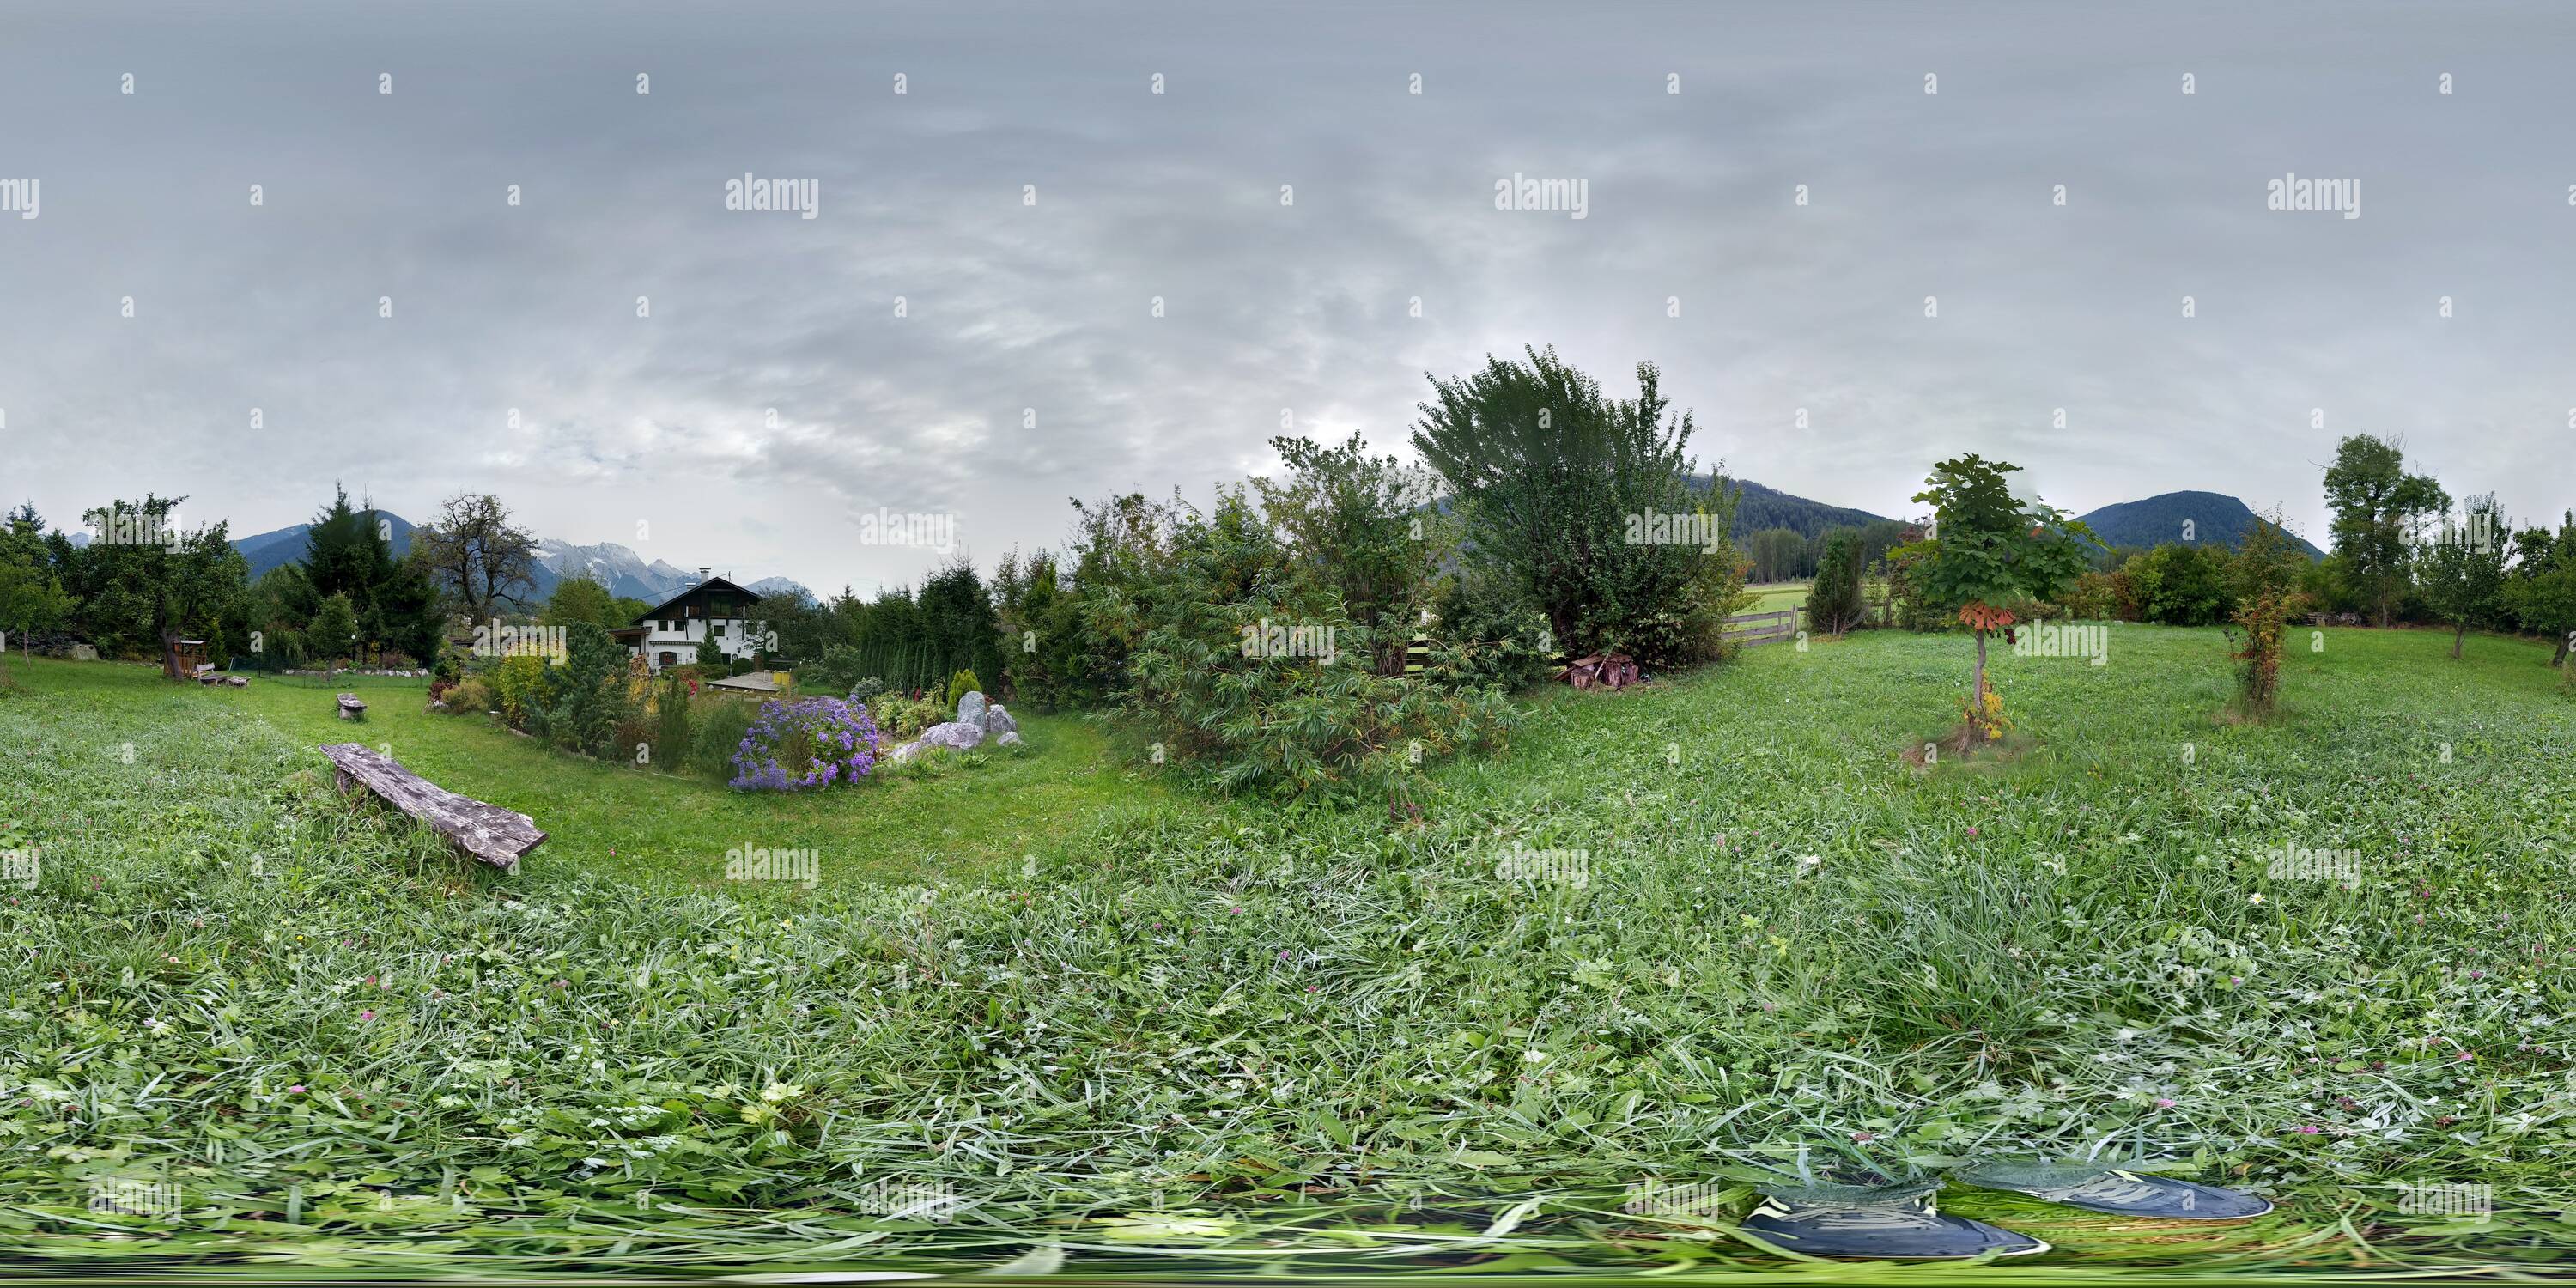 360 degree panoramic view of A Beautiful Backyard Pond in Obsteig, Austria